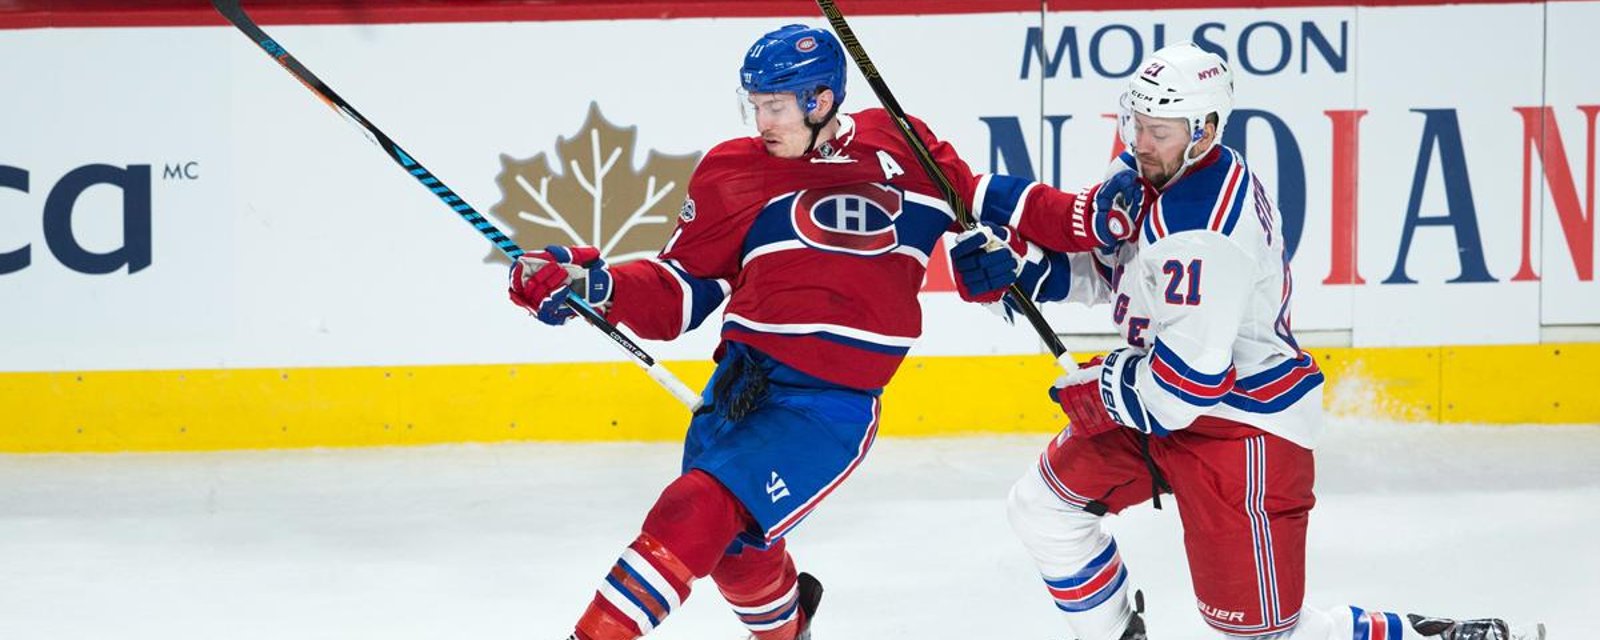 Montreal's lines change analyzed ahead of game 3. 